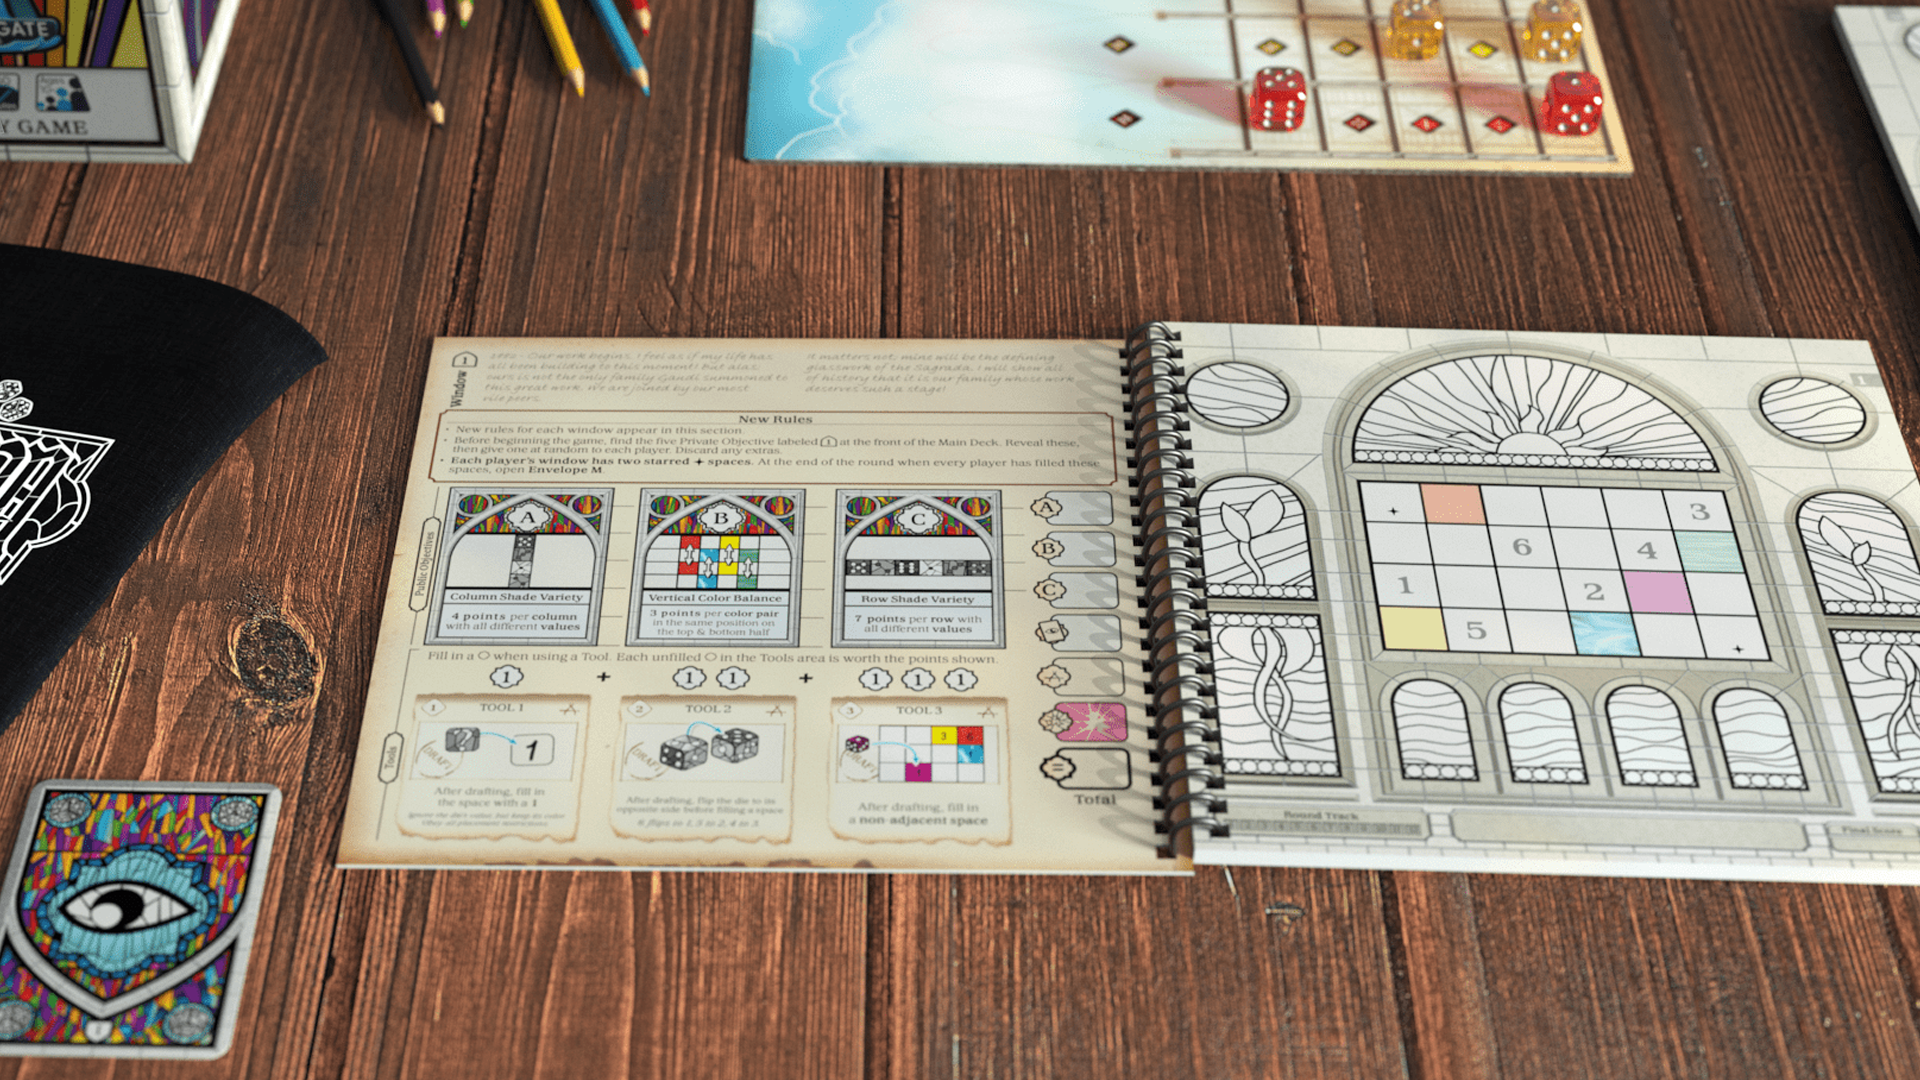 A layout image of the components for Sagrada: Artisans.